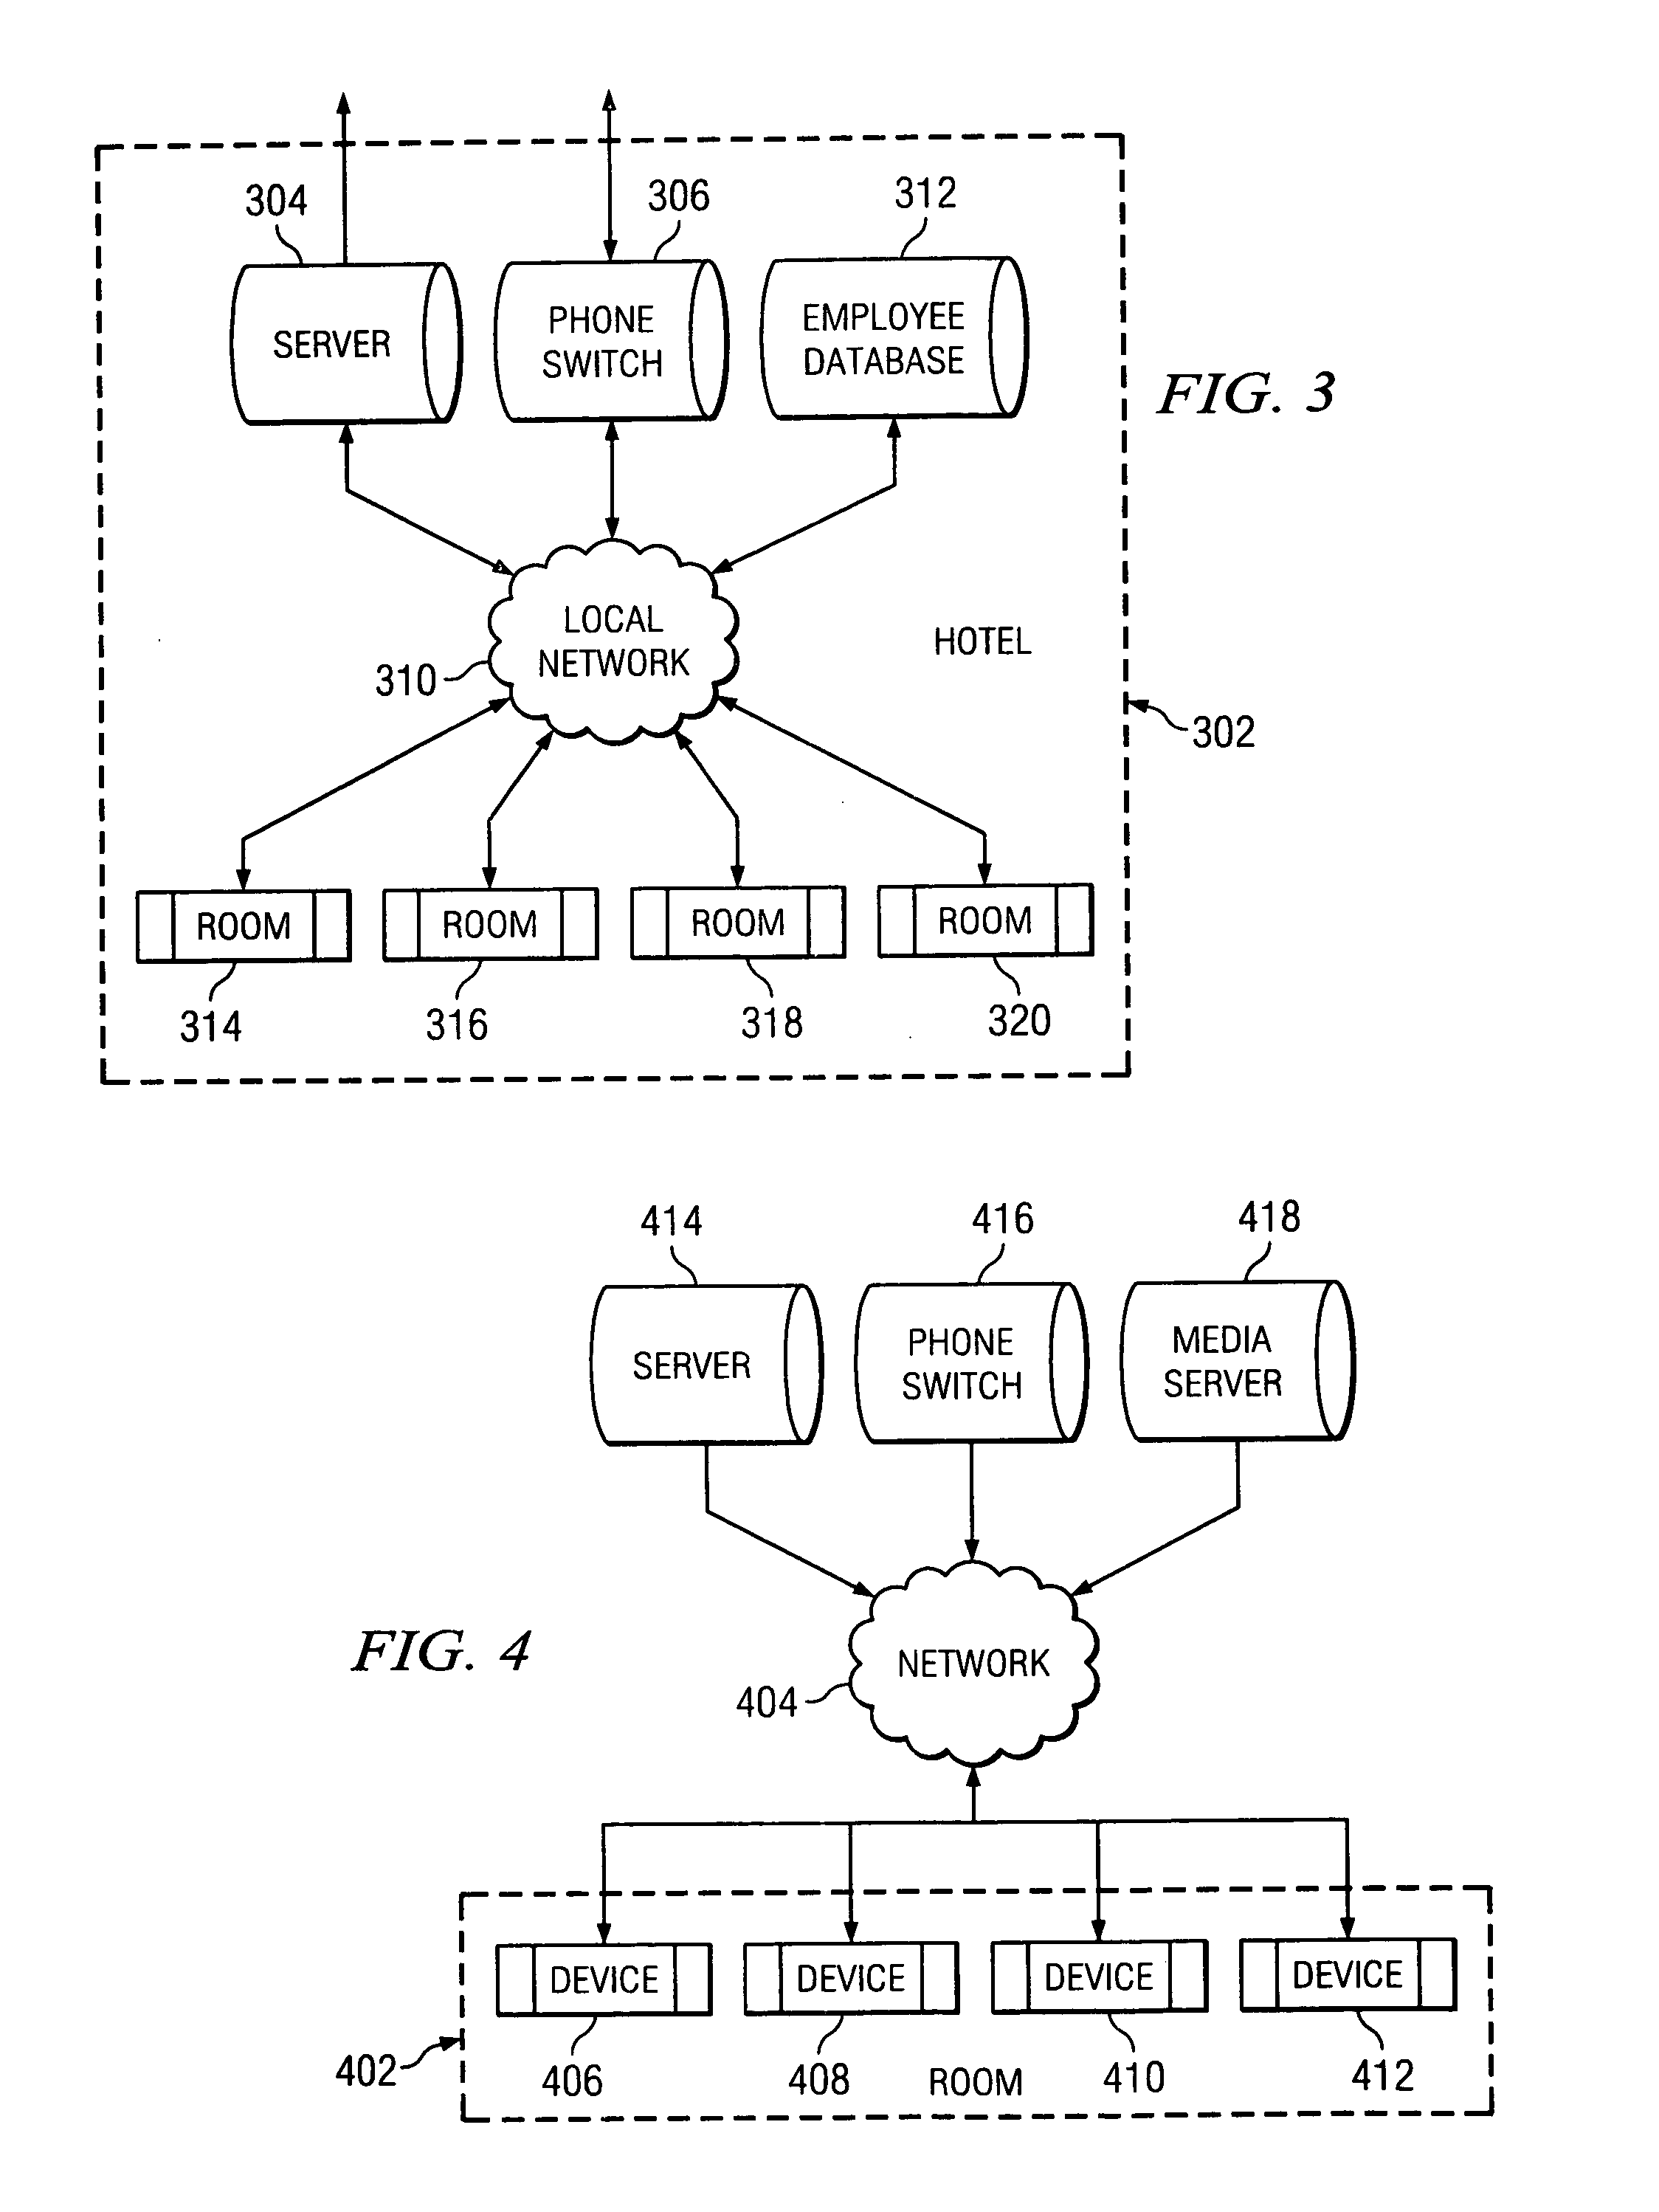 Computer implemented method, apparatus, and computer usable program code for configuring language dependent features